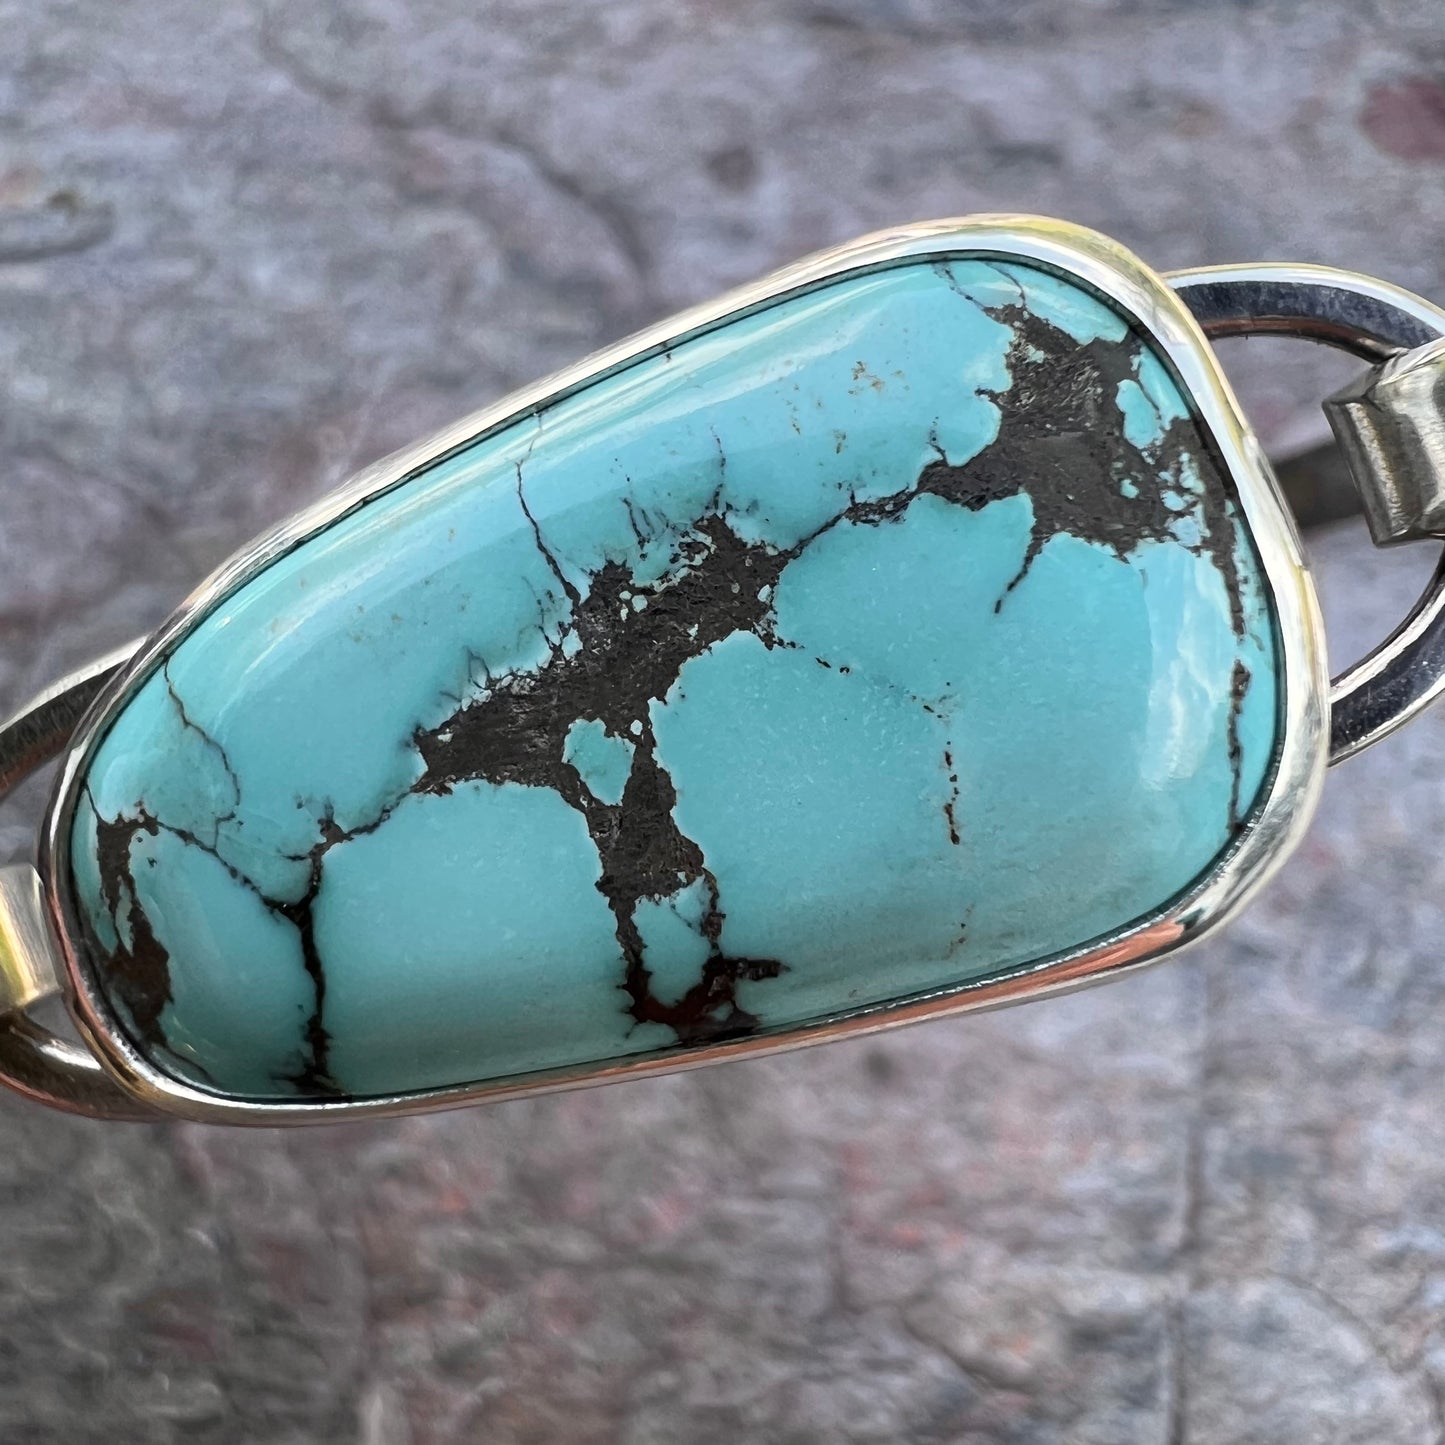 Turquoise Sterling Silver Bracelet - Handmade One-of-a-kind Tension Cuff Bracelet